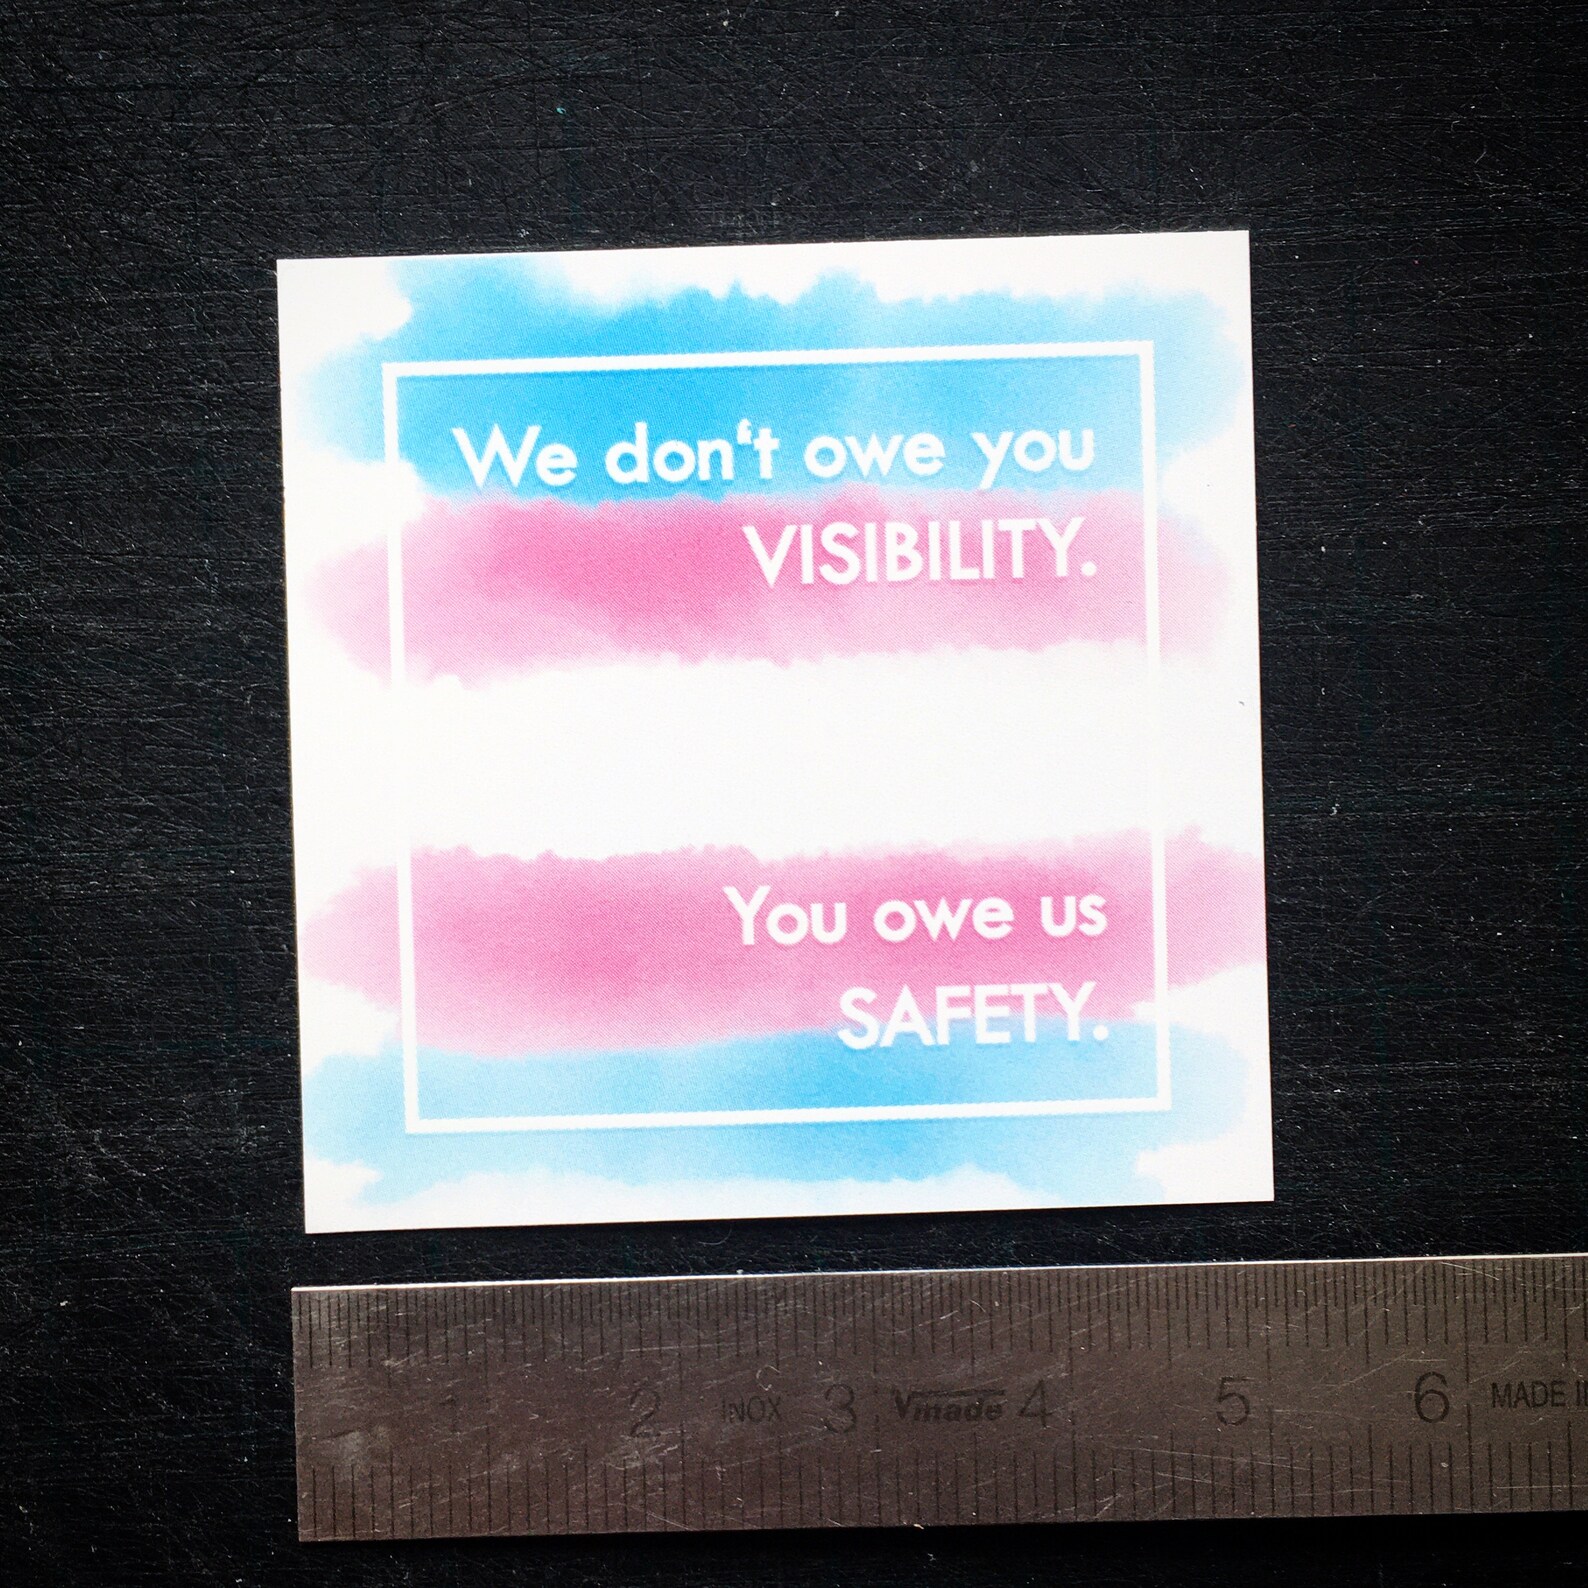 We don't owe you visibility